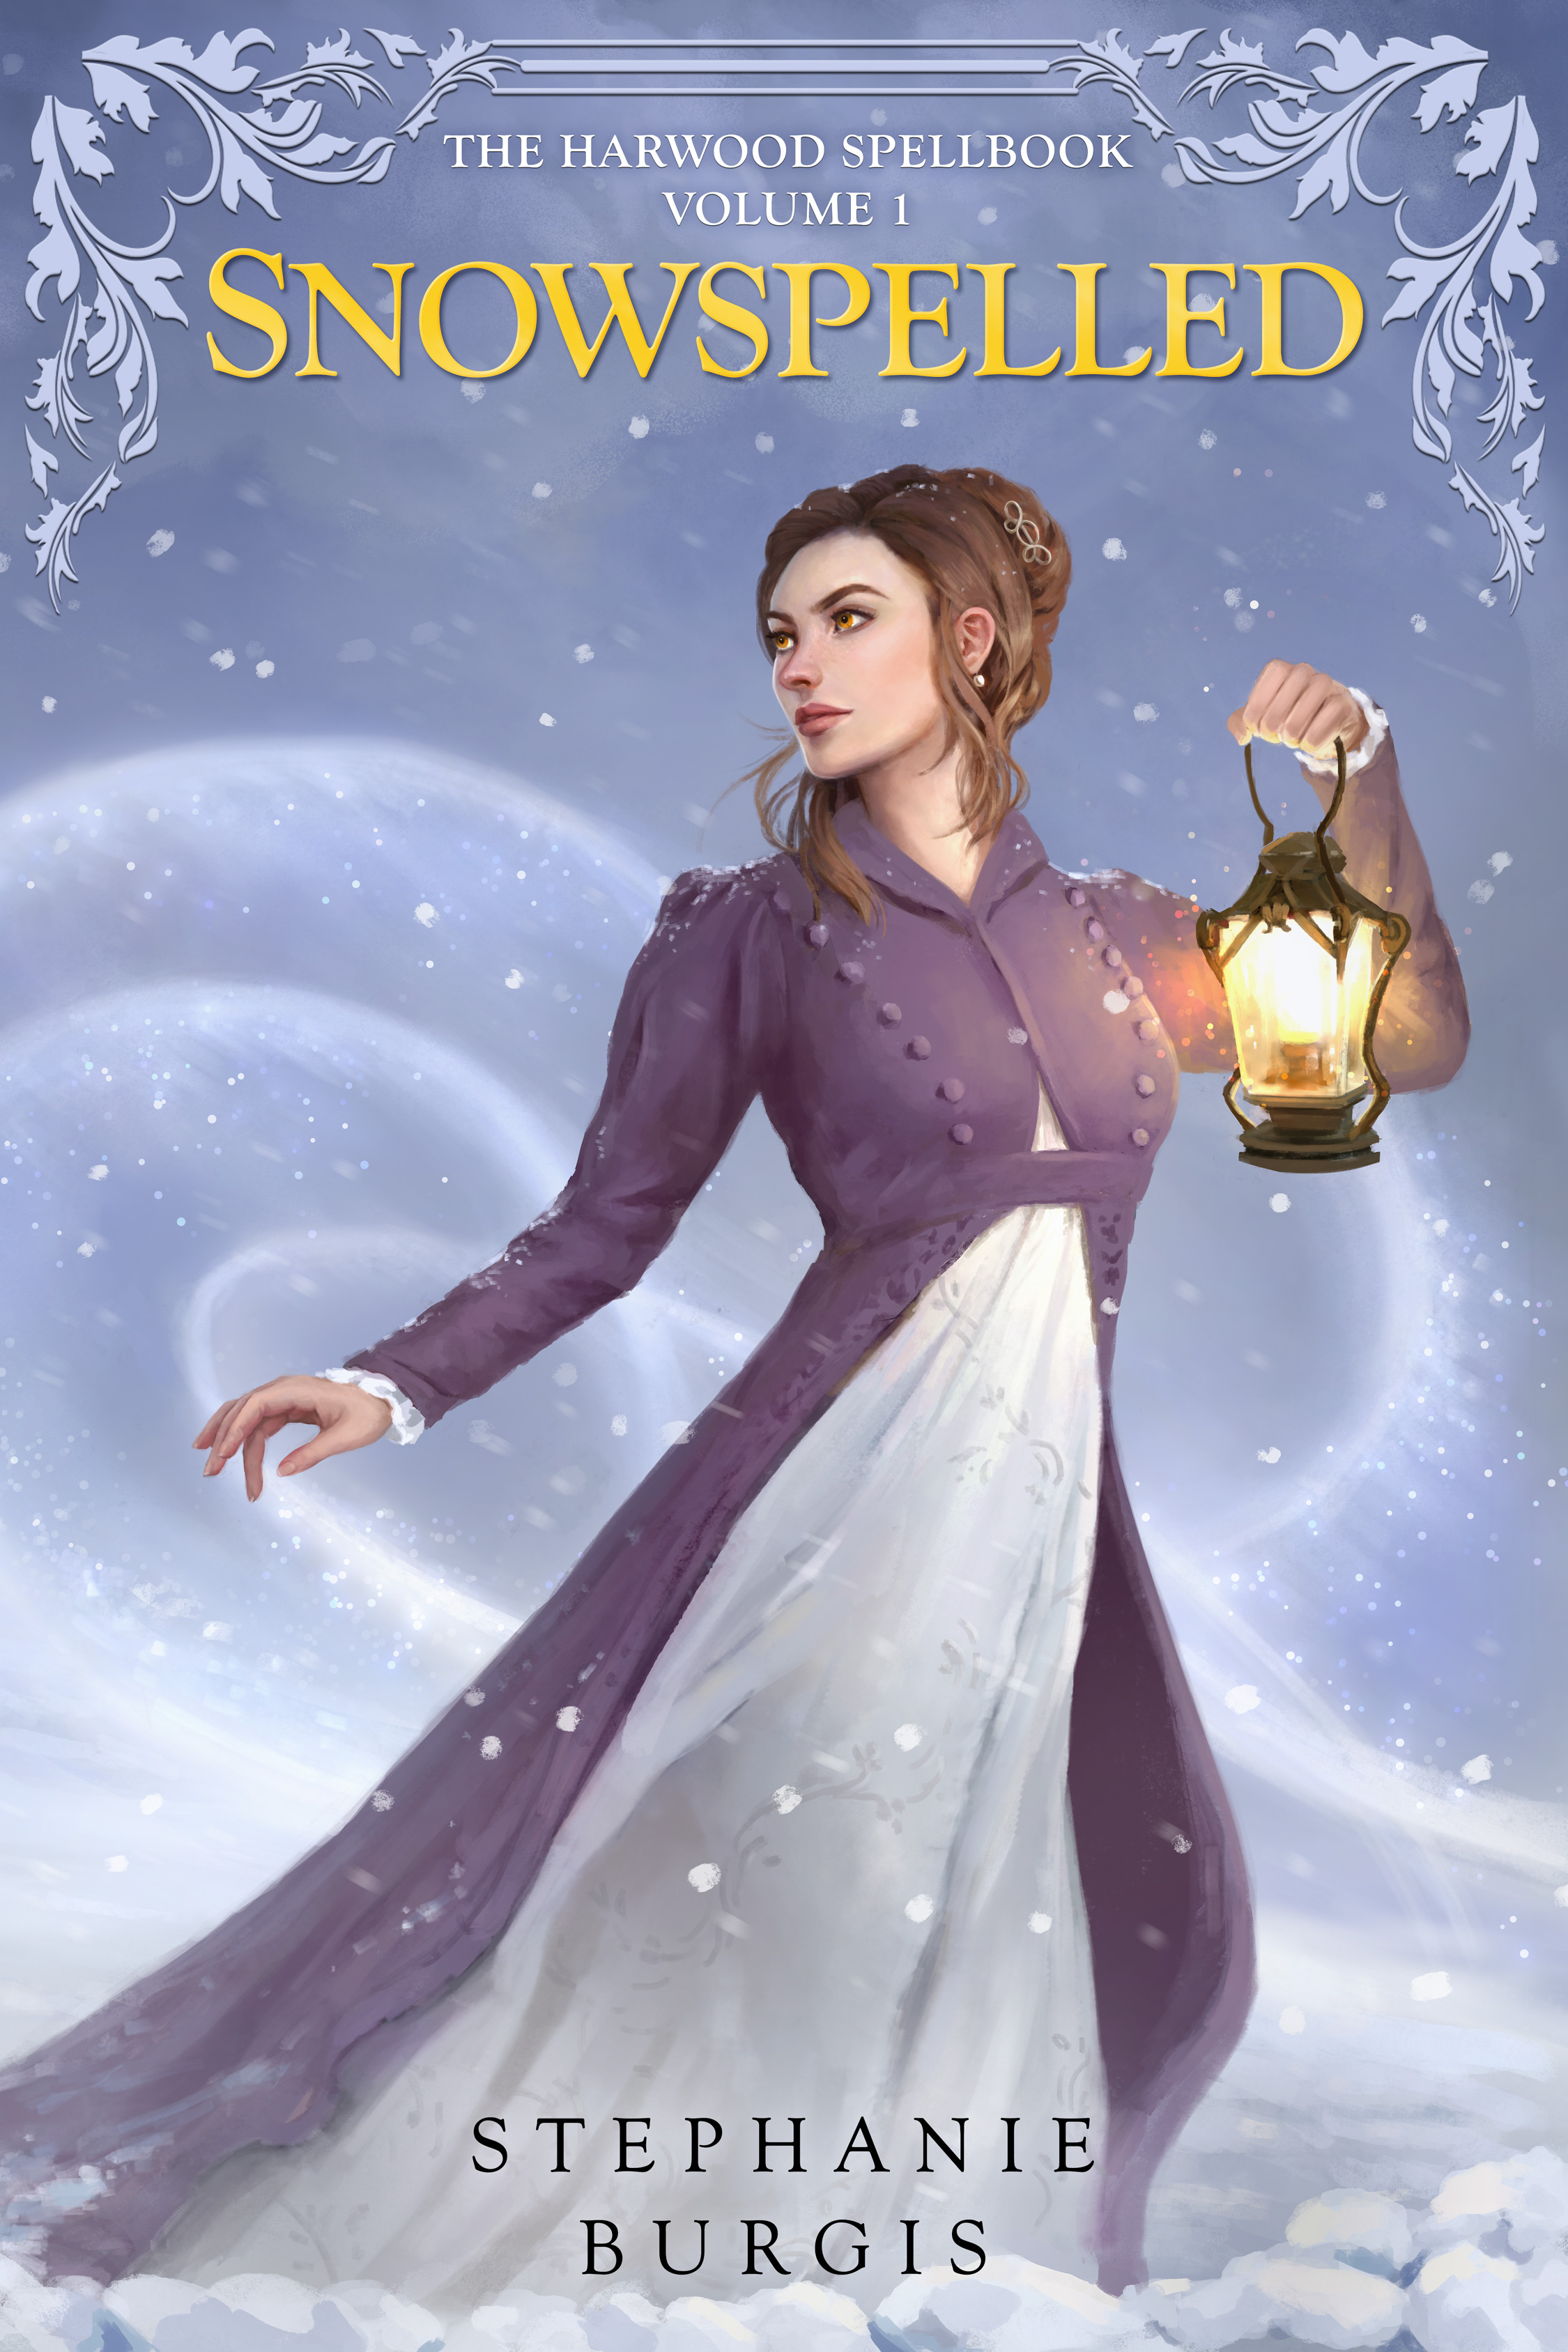 Cover: Snowspelled, The Harwood Spellbook Volume I, by Stephanie Burgis